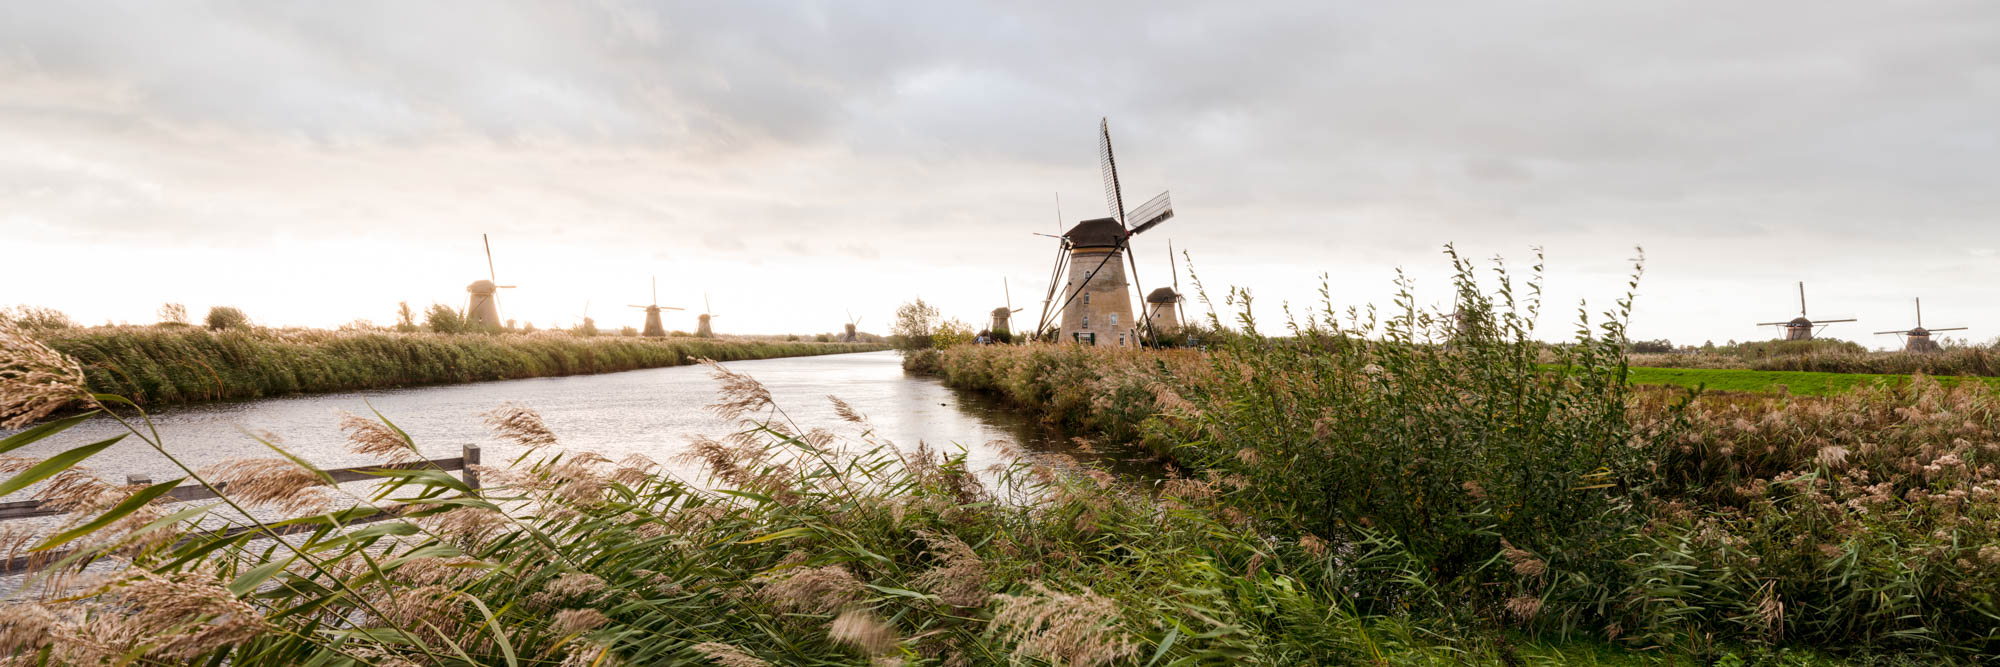 Panorama of the Kinderdijk Windmills in Holland in the Netherlands